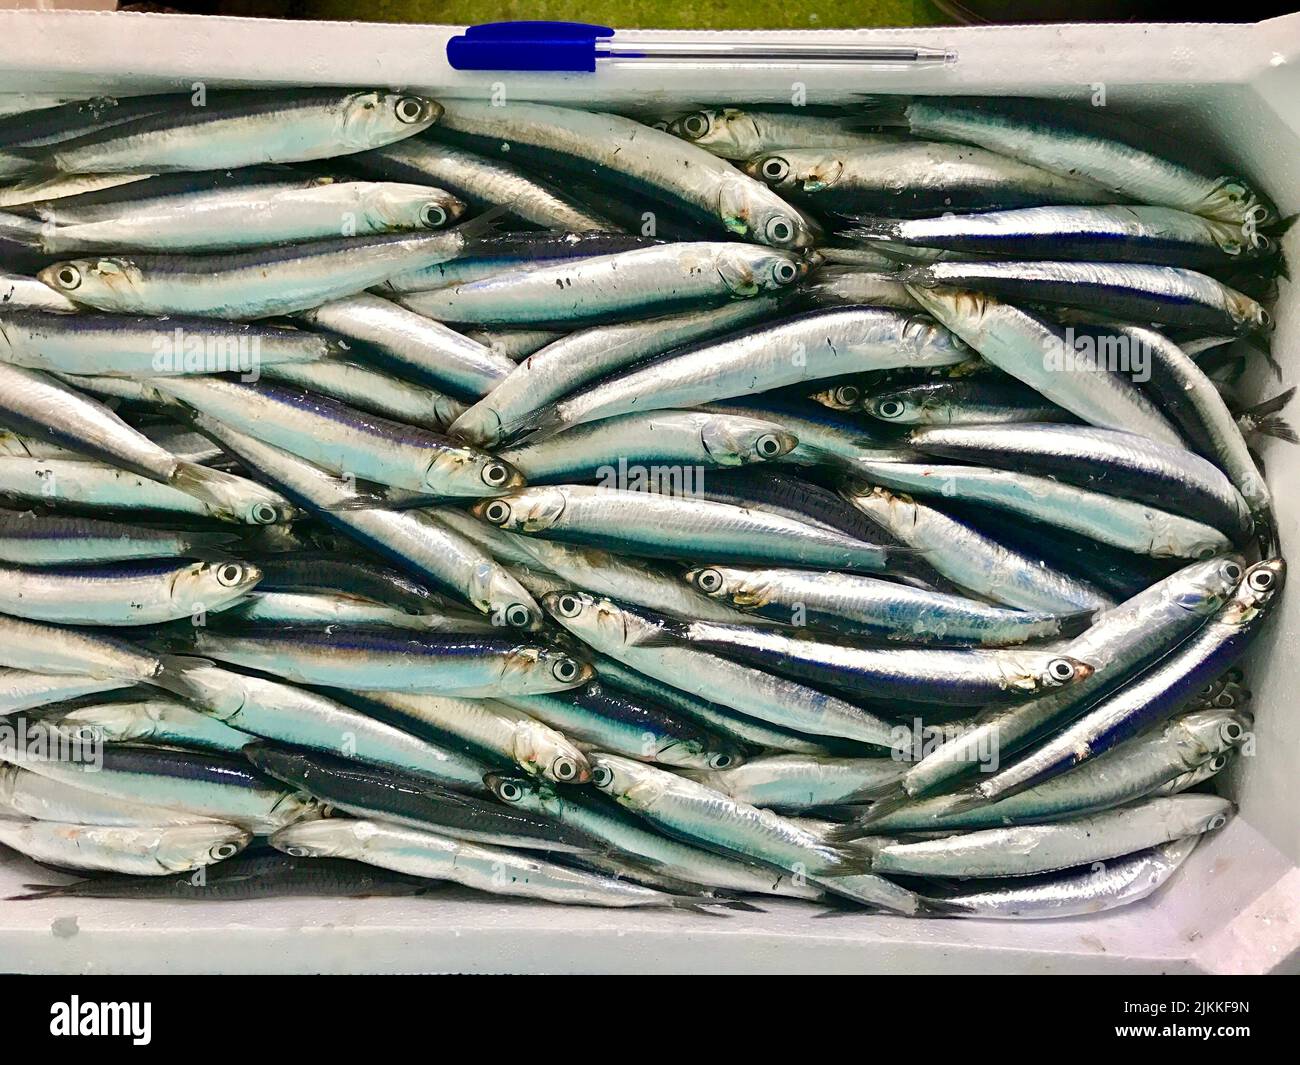 The anchovy fish for sale in street market Stock Photo